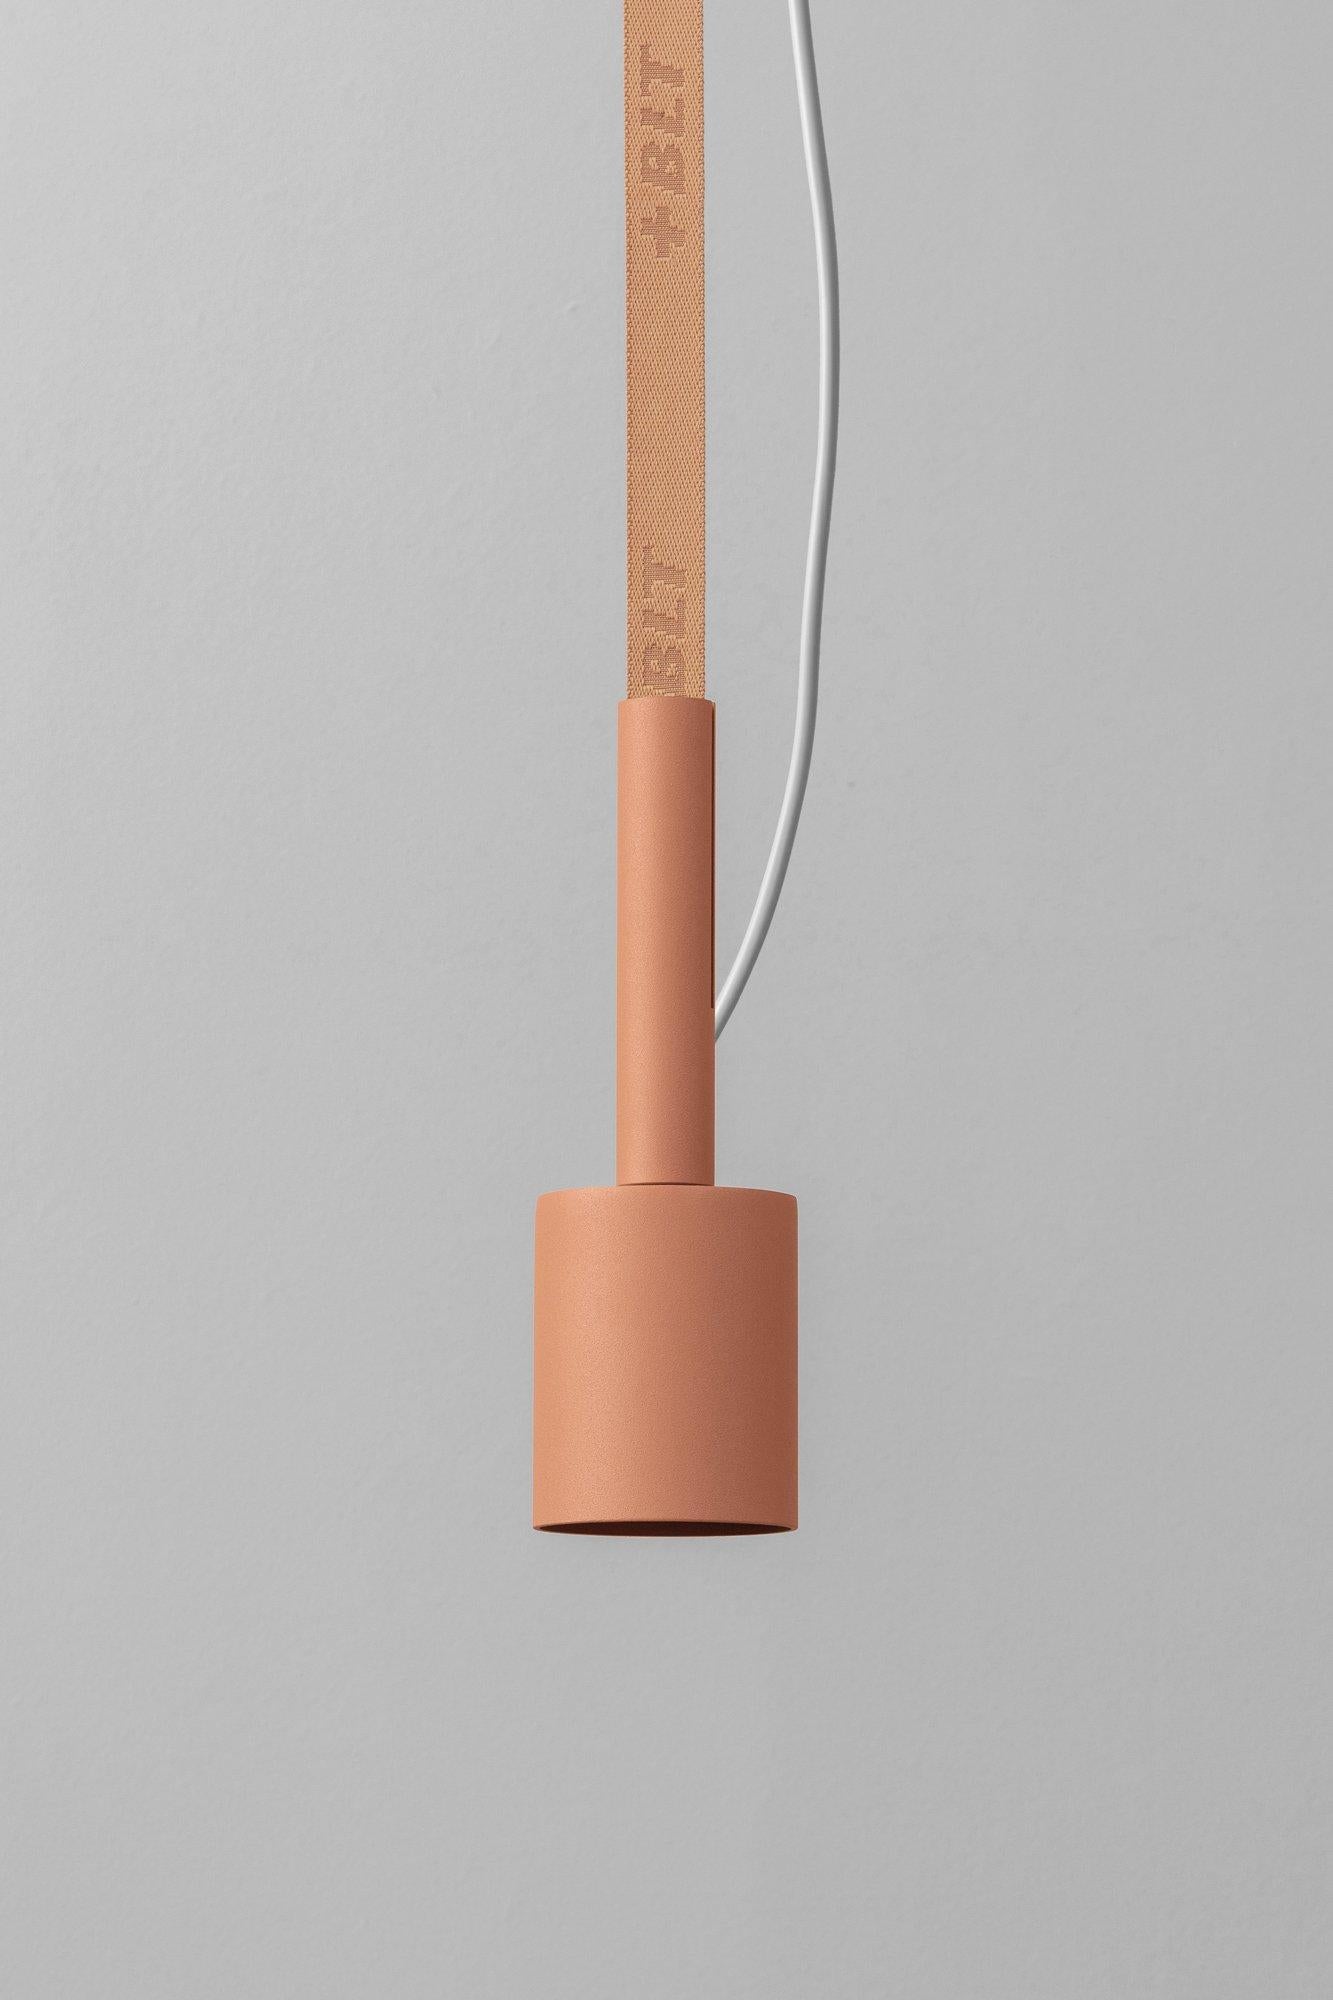 BLT_5 Coral Pendant Lamp by +kouple
Dimensions: Ø 8 x H 25,2 cm. 
Materials: Powder-coated steel and textile.

Available in different color options. The rod length is 250 cm. Please contact us.

All our lamps can be wired according to each country.